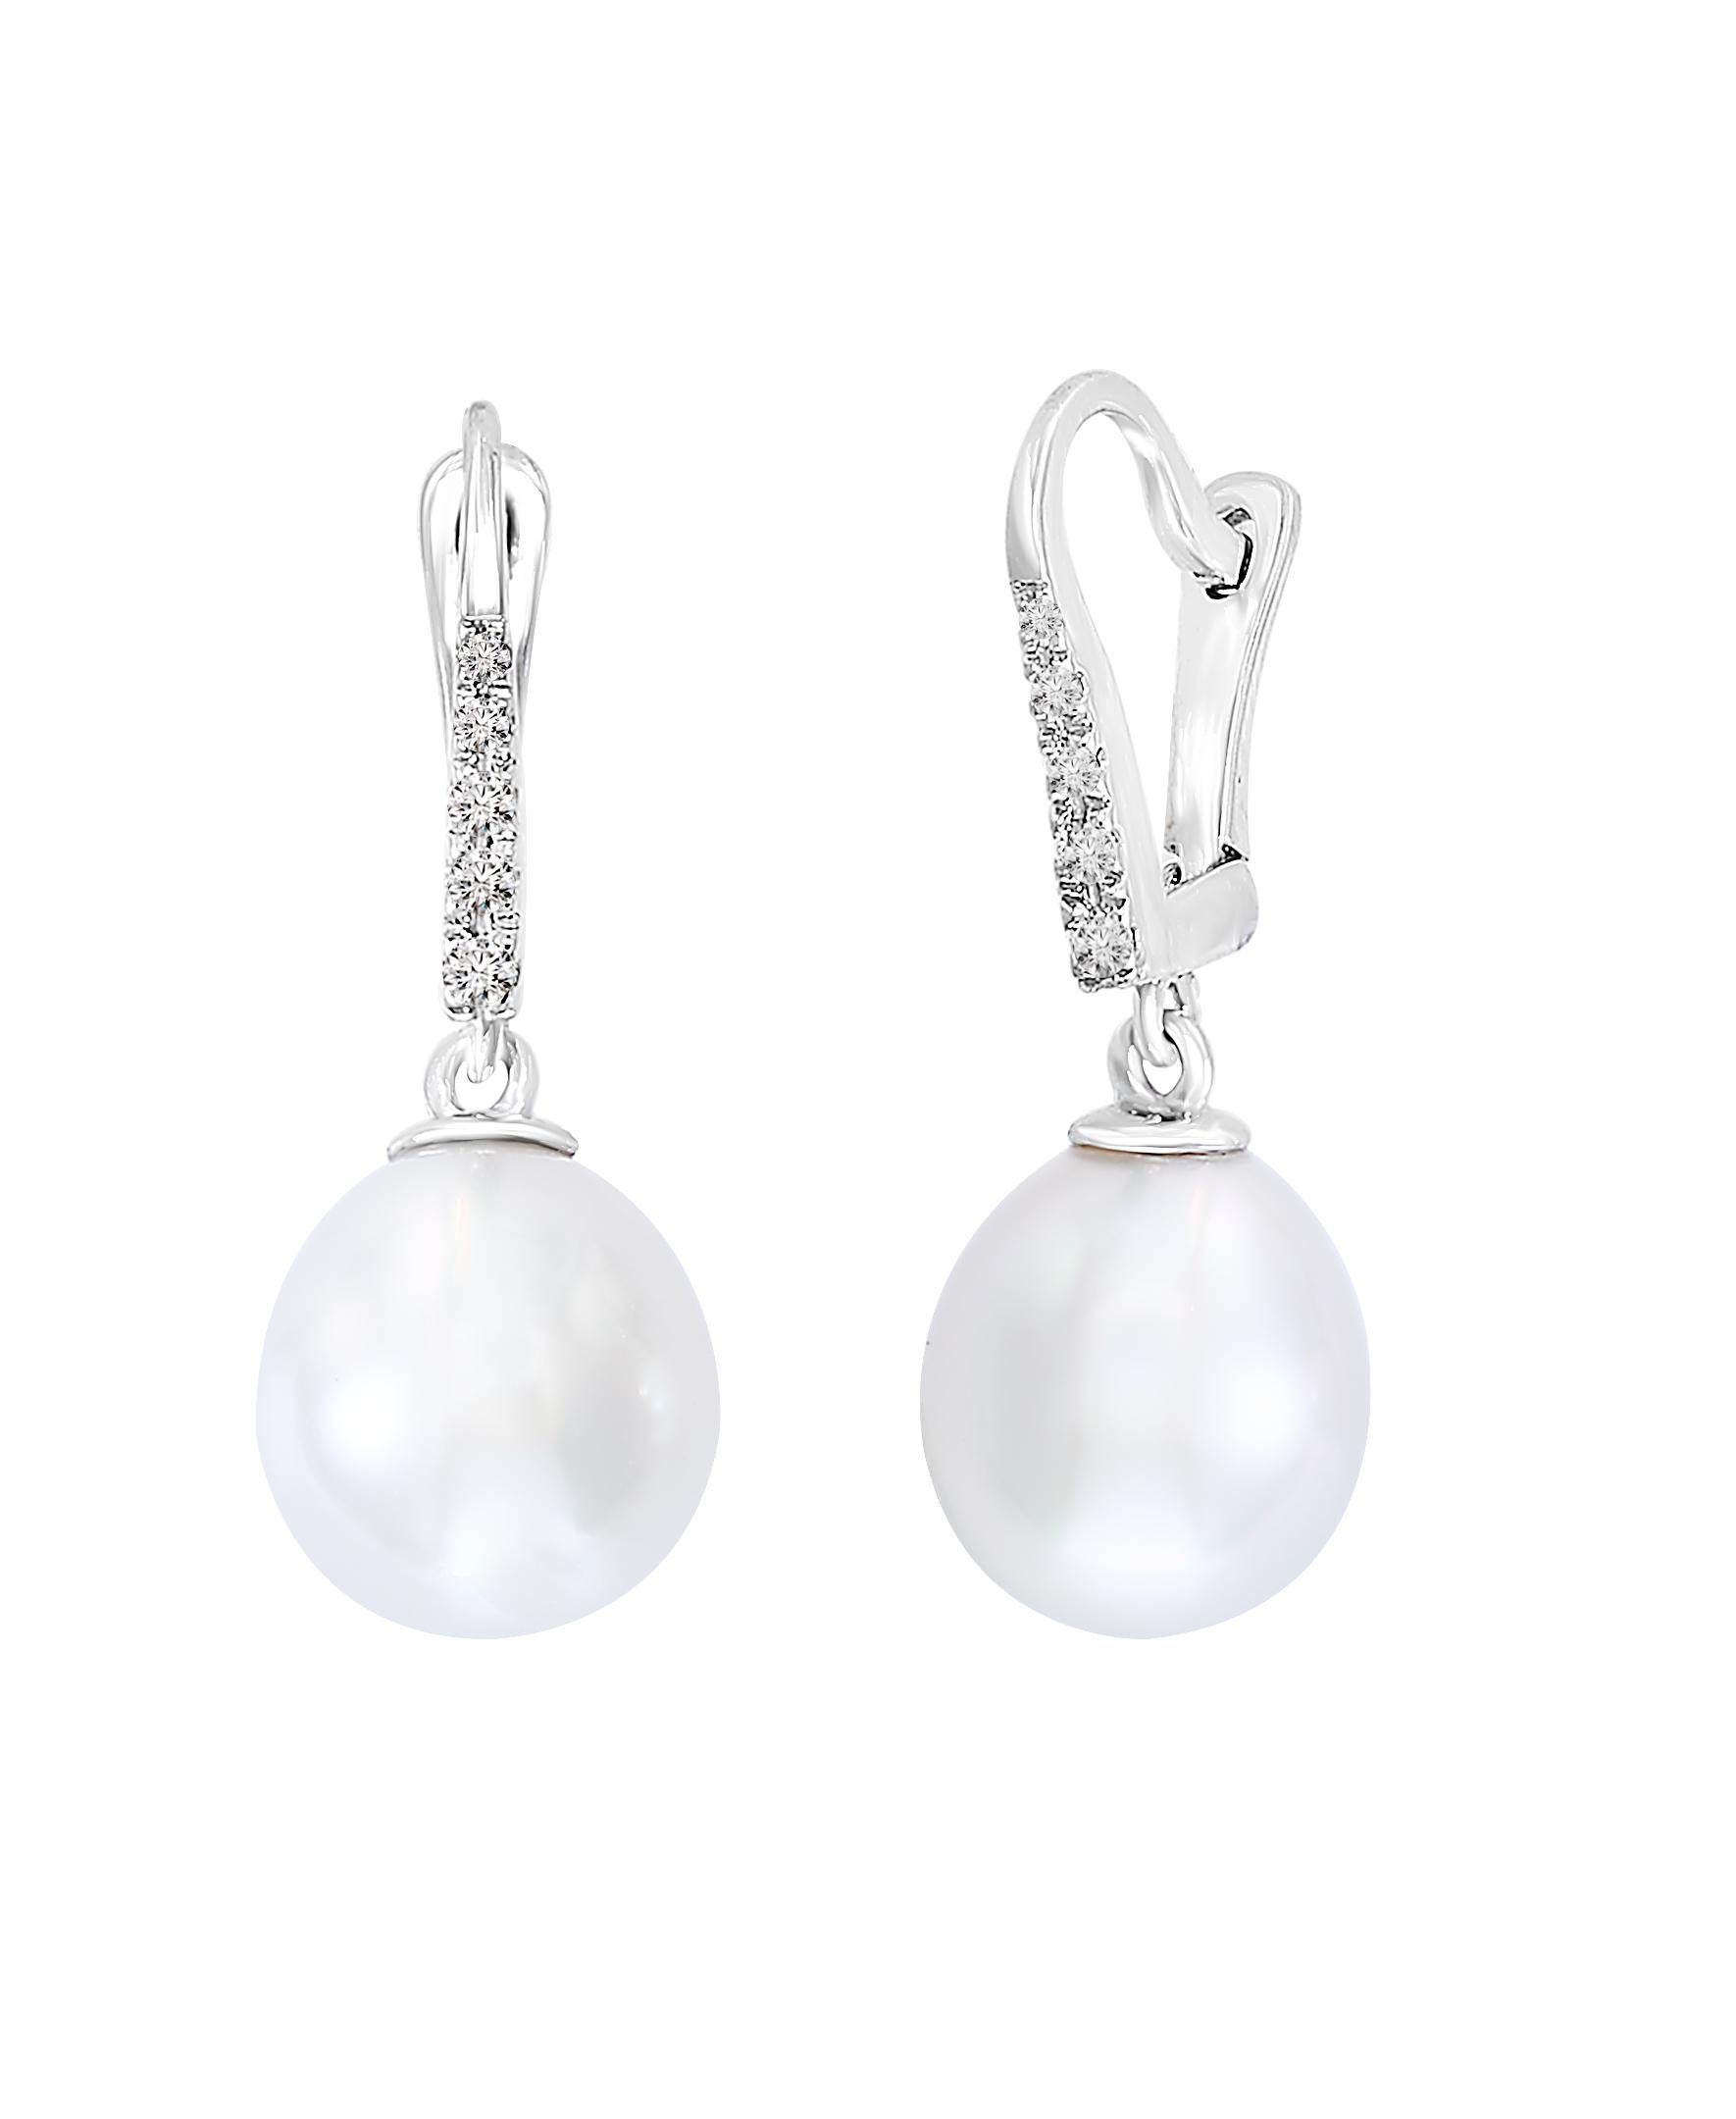 These dangle earrings feature South Sea drop-shaped pearls measuring 9-10mm in width. The earrings are made of 14k white gold with  .085 total carats of diamonds. 
Great for everyday wear or a dressy occasion, these earrings are a must-have for any